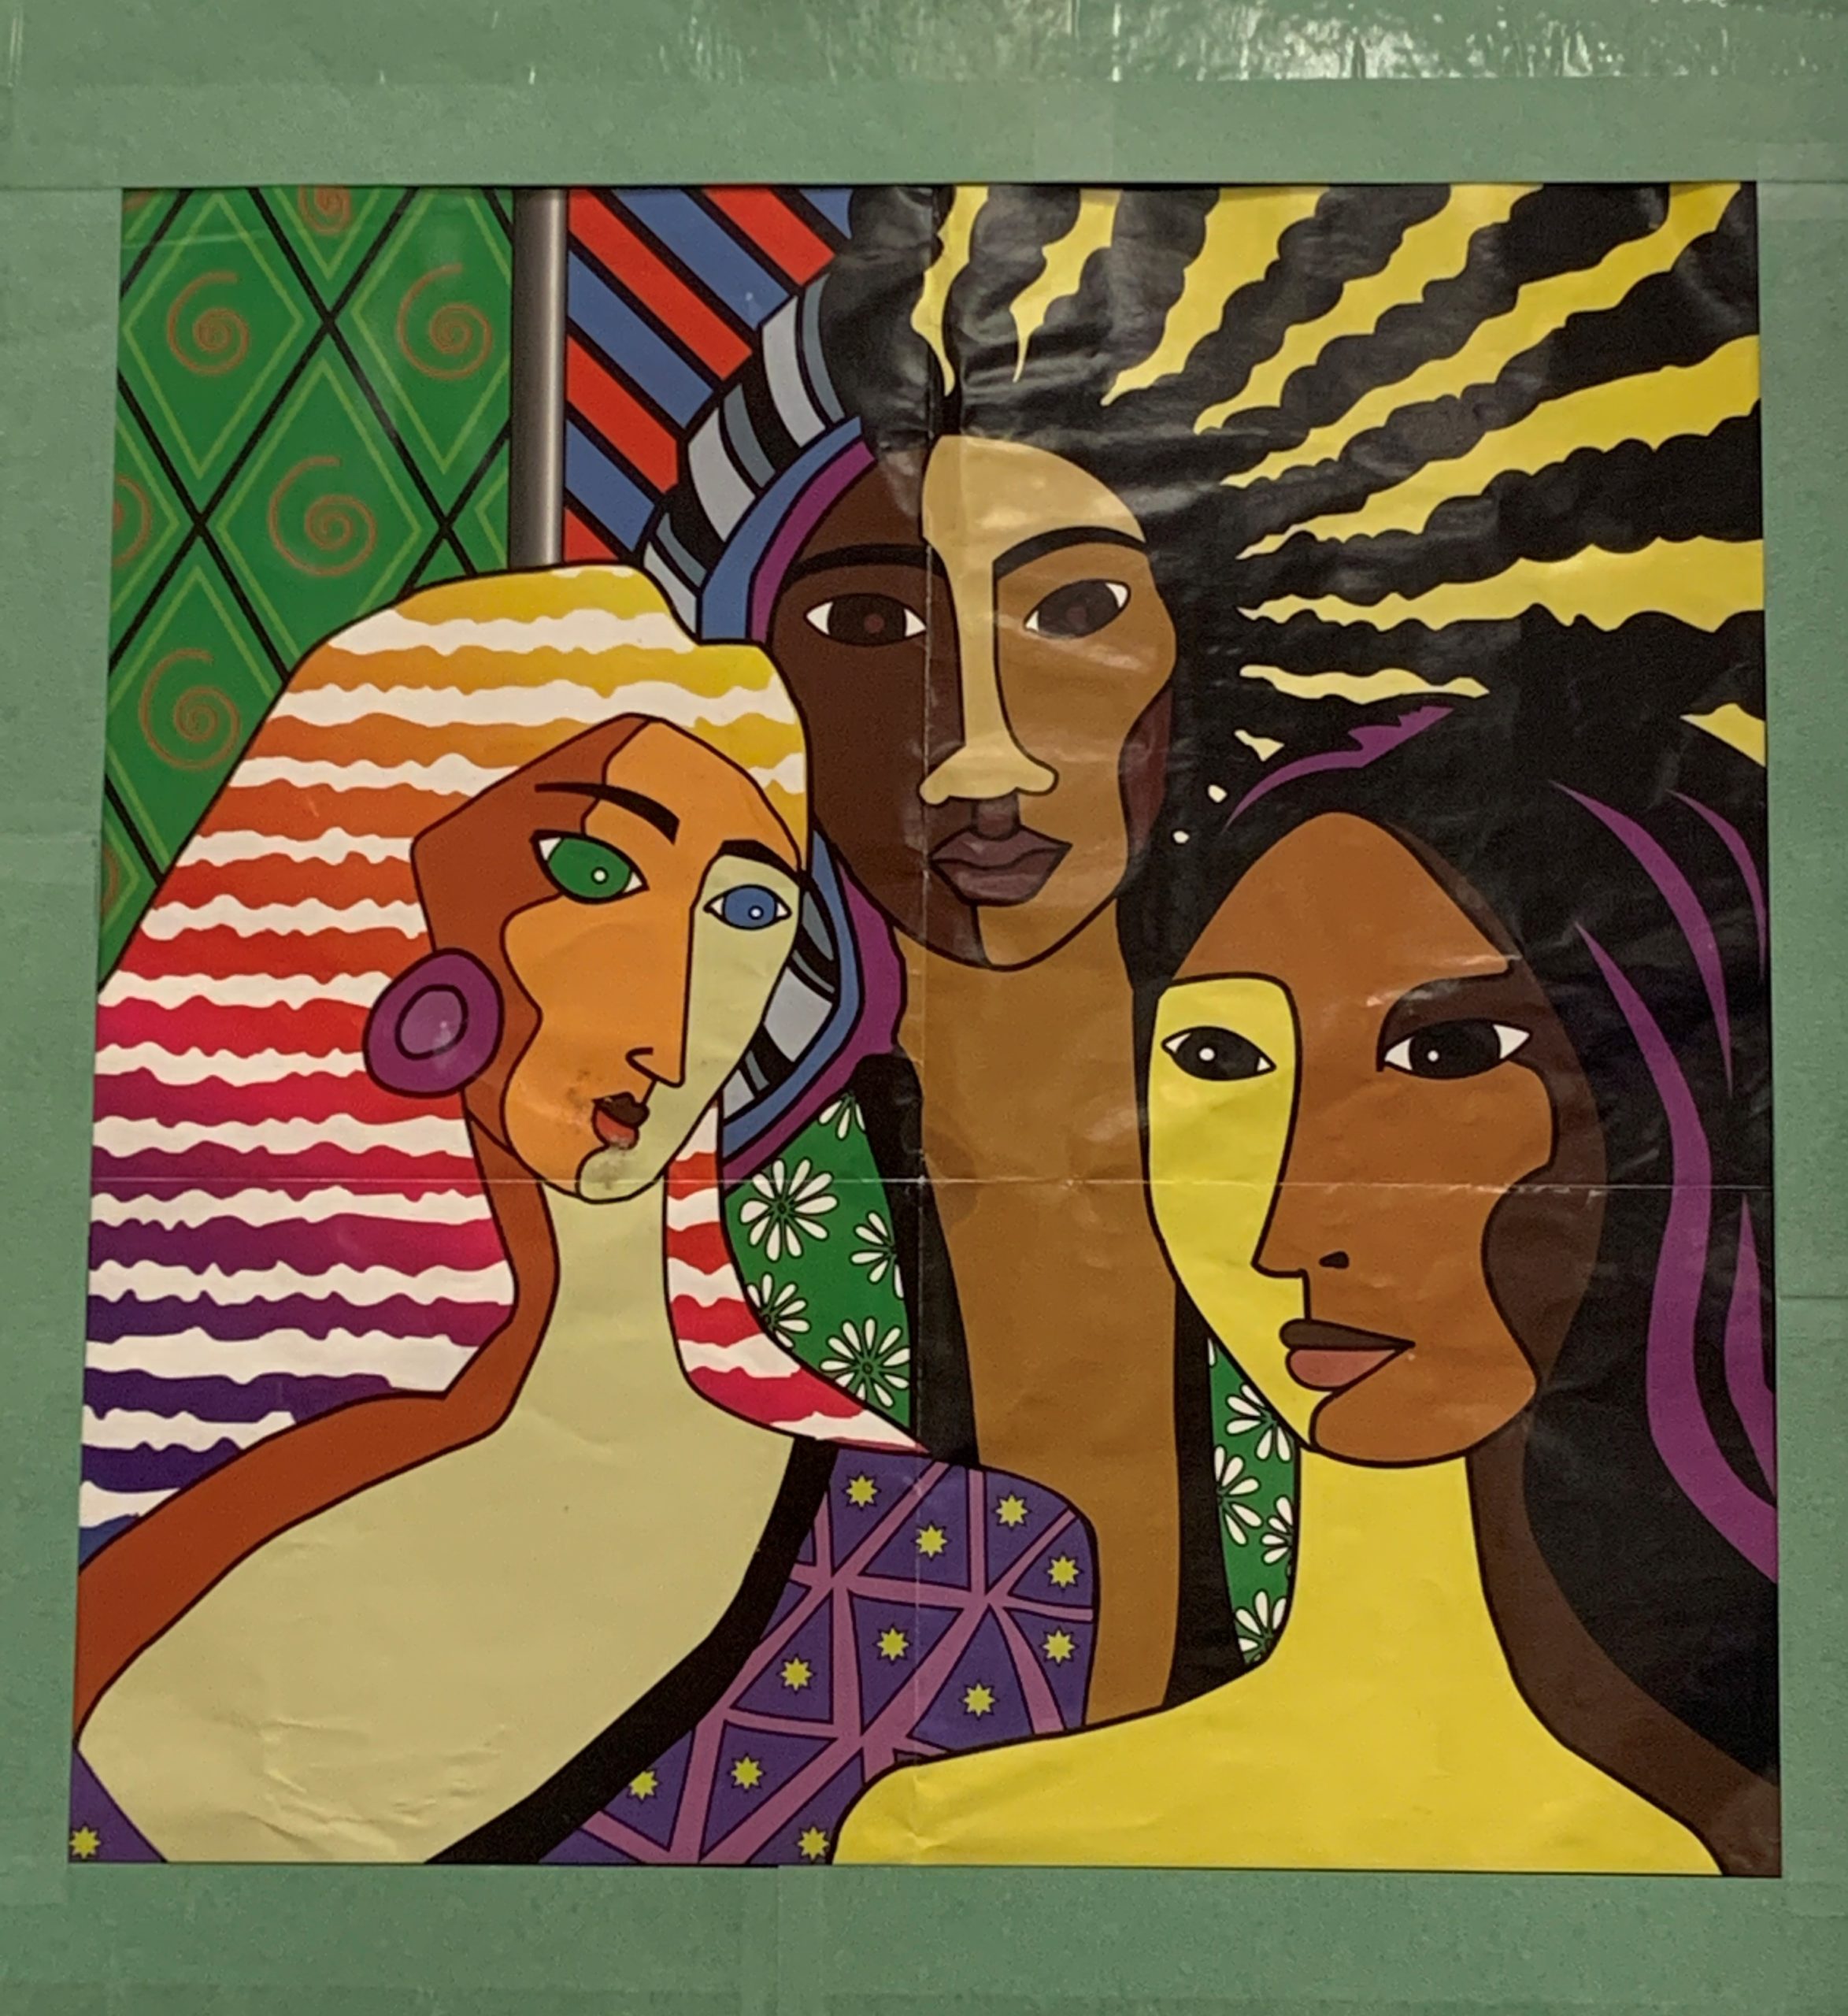 A drawing of three women in an array of different colors and patterns.